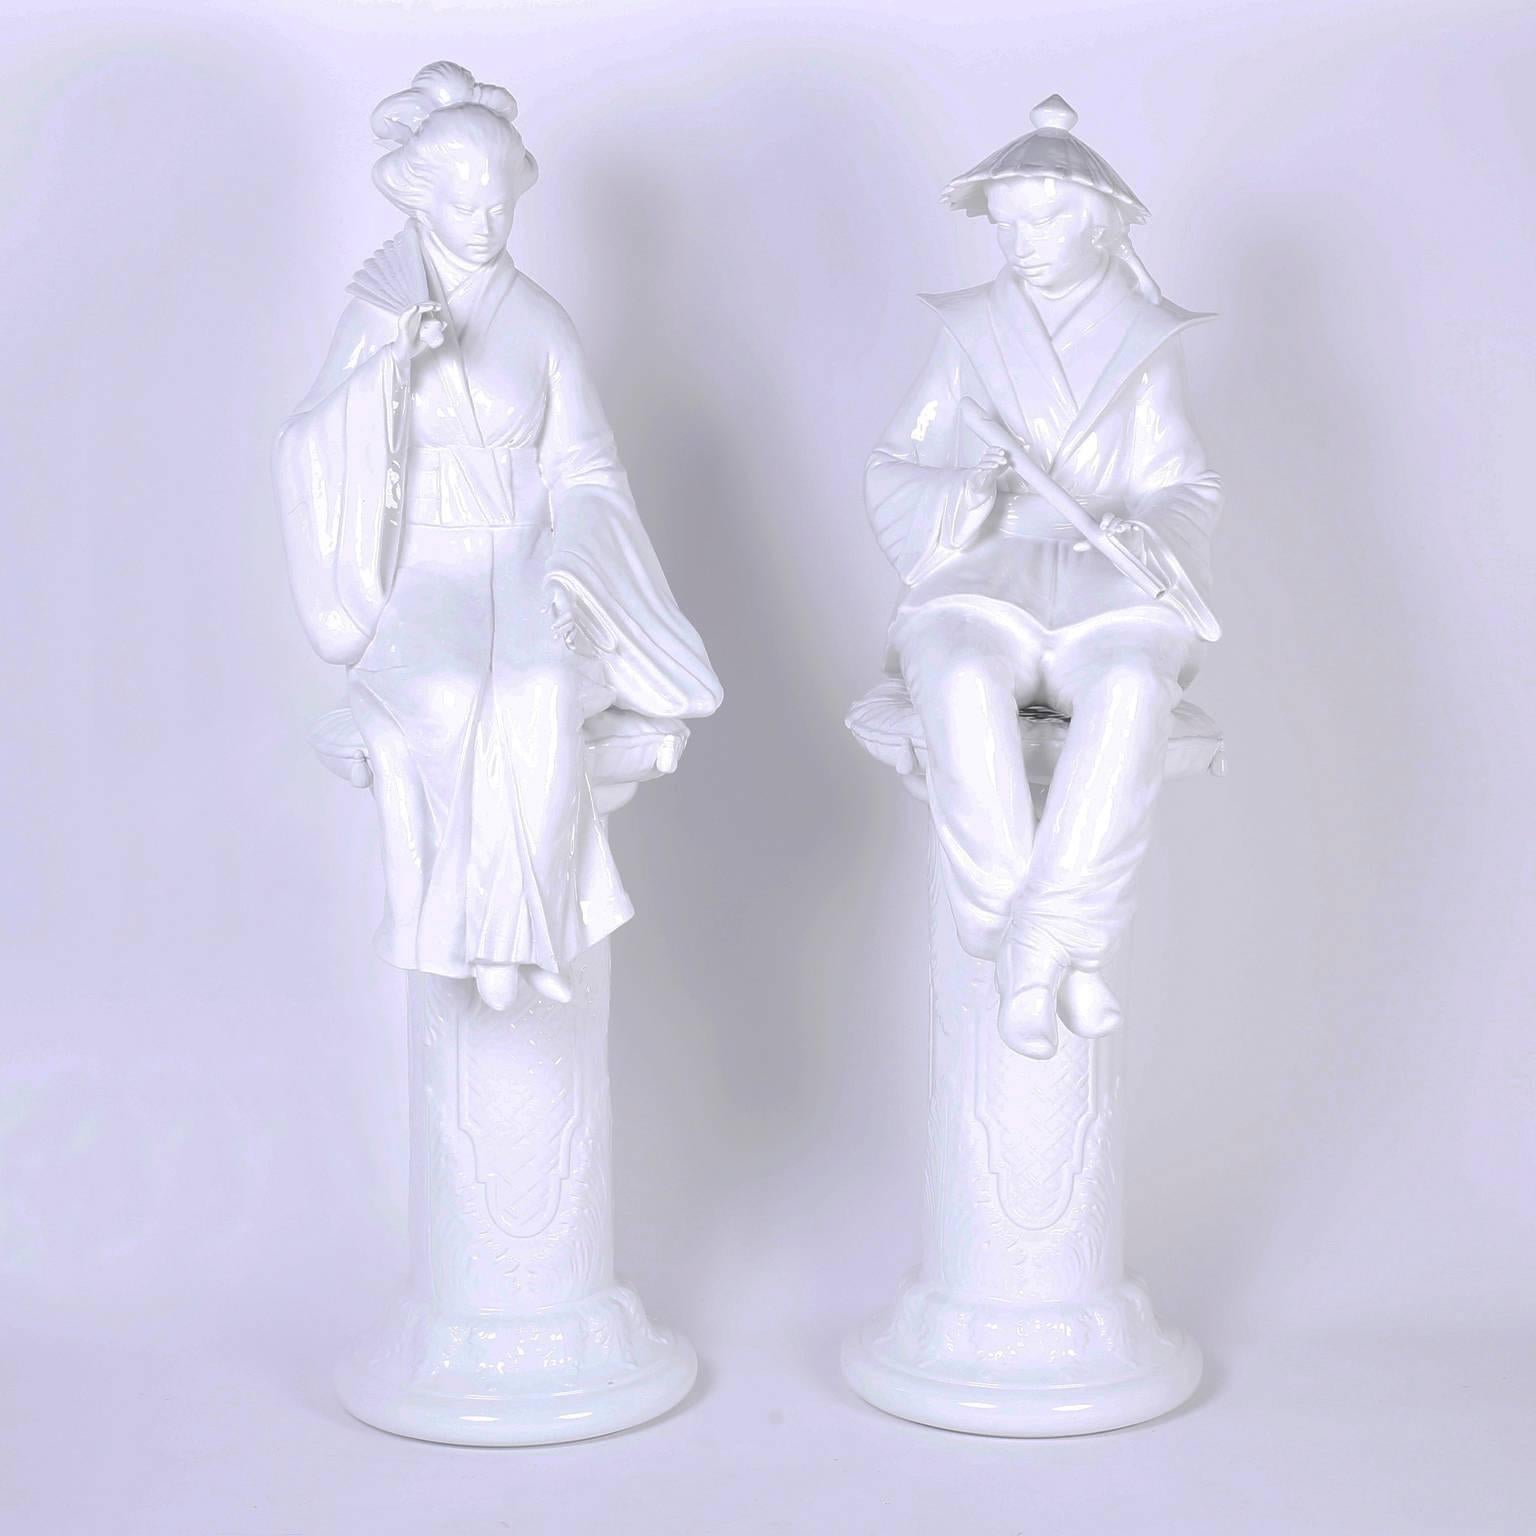 Chic pair of porcelain figures crafted in three pieces: pedestal, pillow, and classic male and female chinoiserie figures, he with a flute and she with a fan, together an alluring, highly decorative couple for the ages. 

The male figure is 53